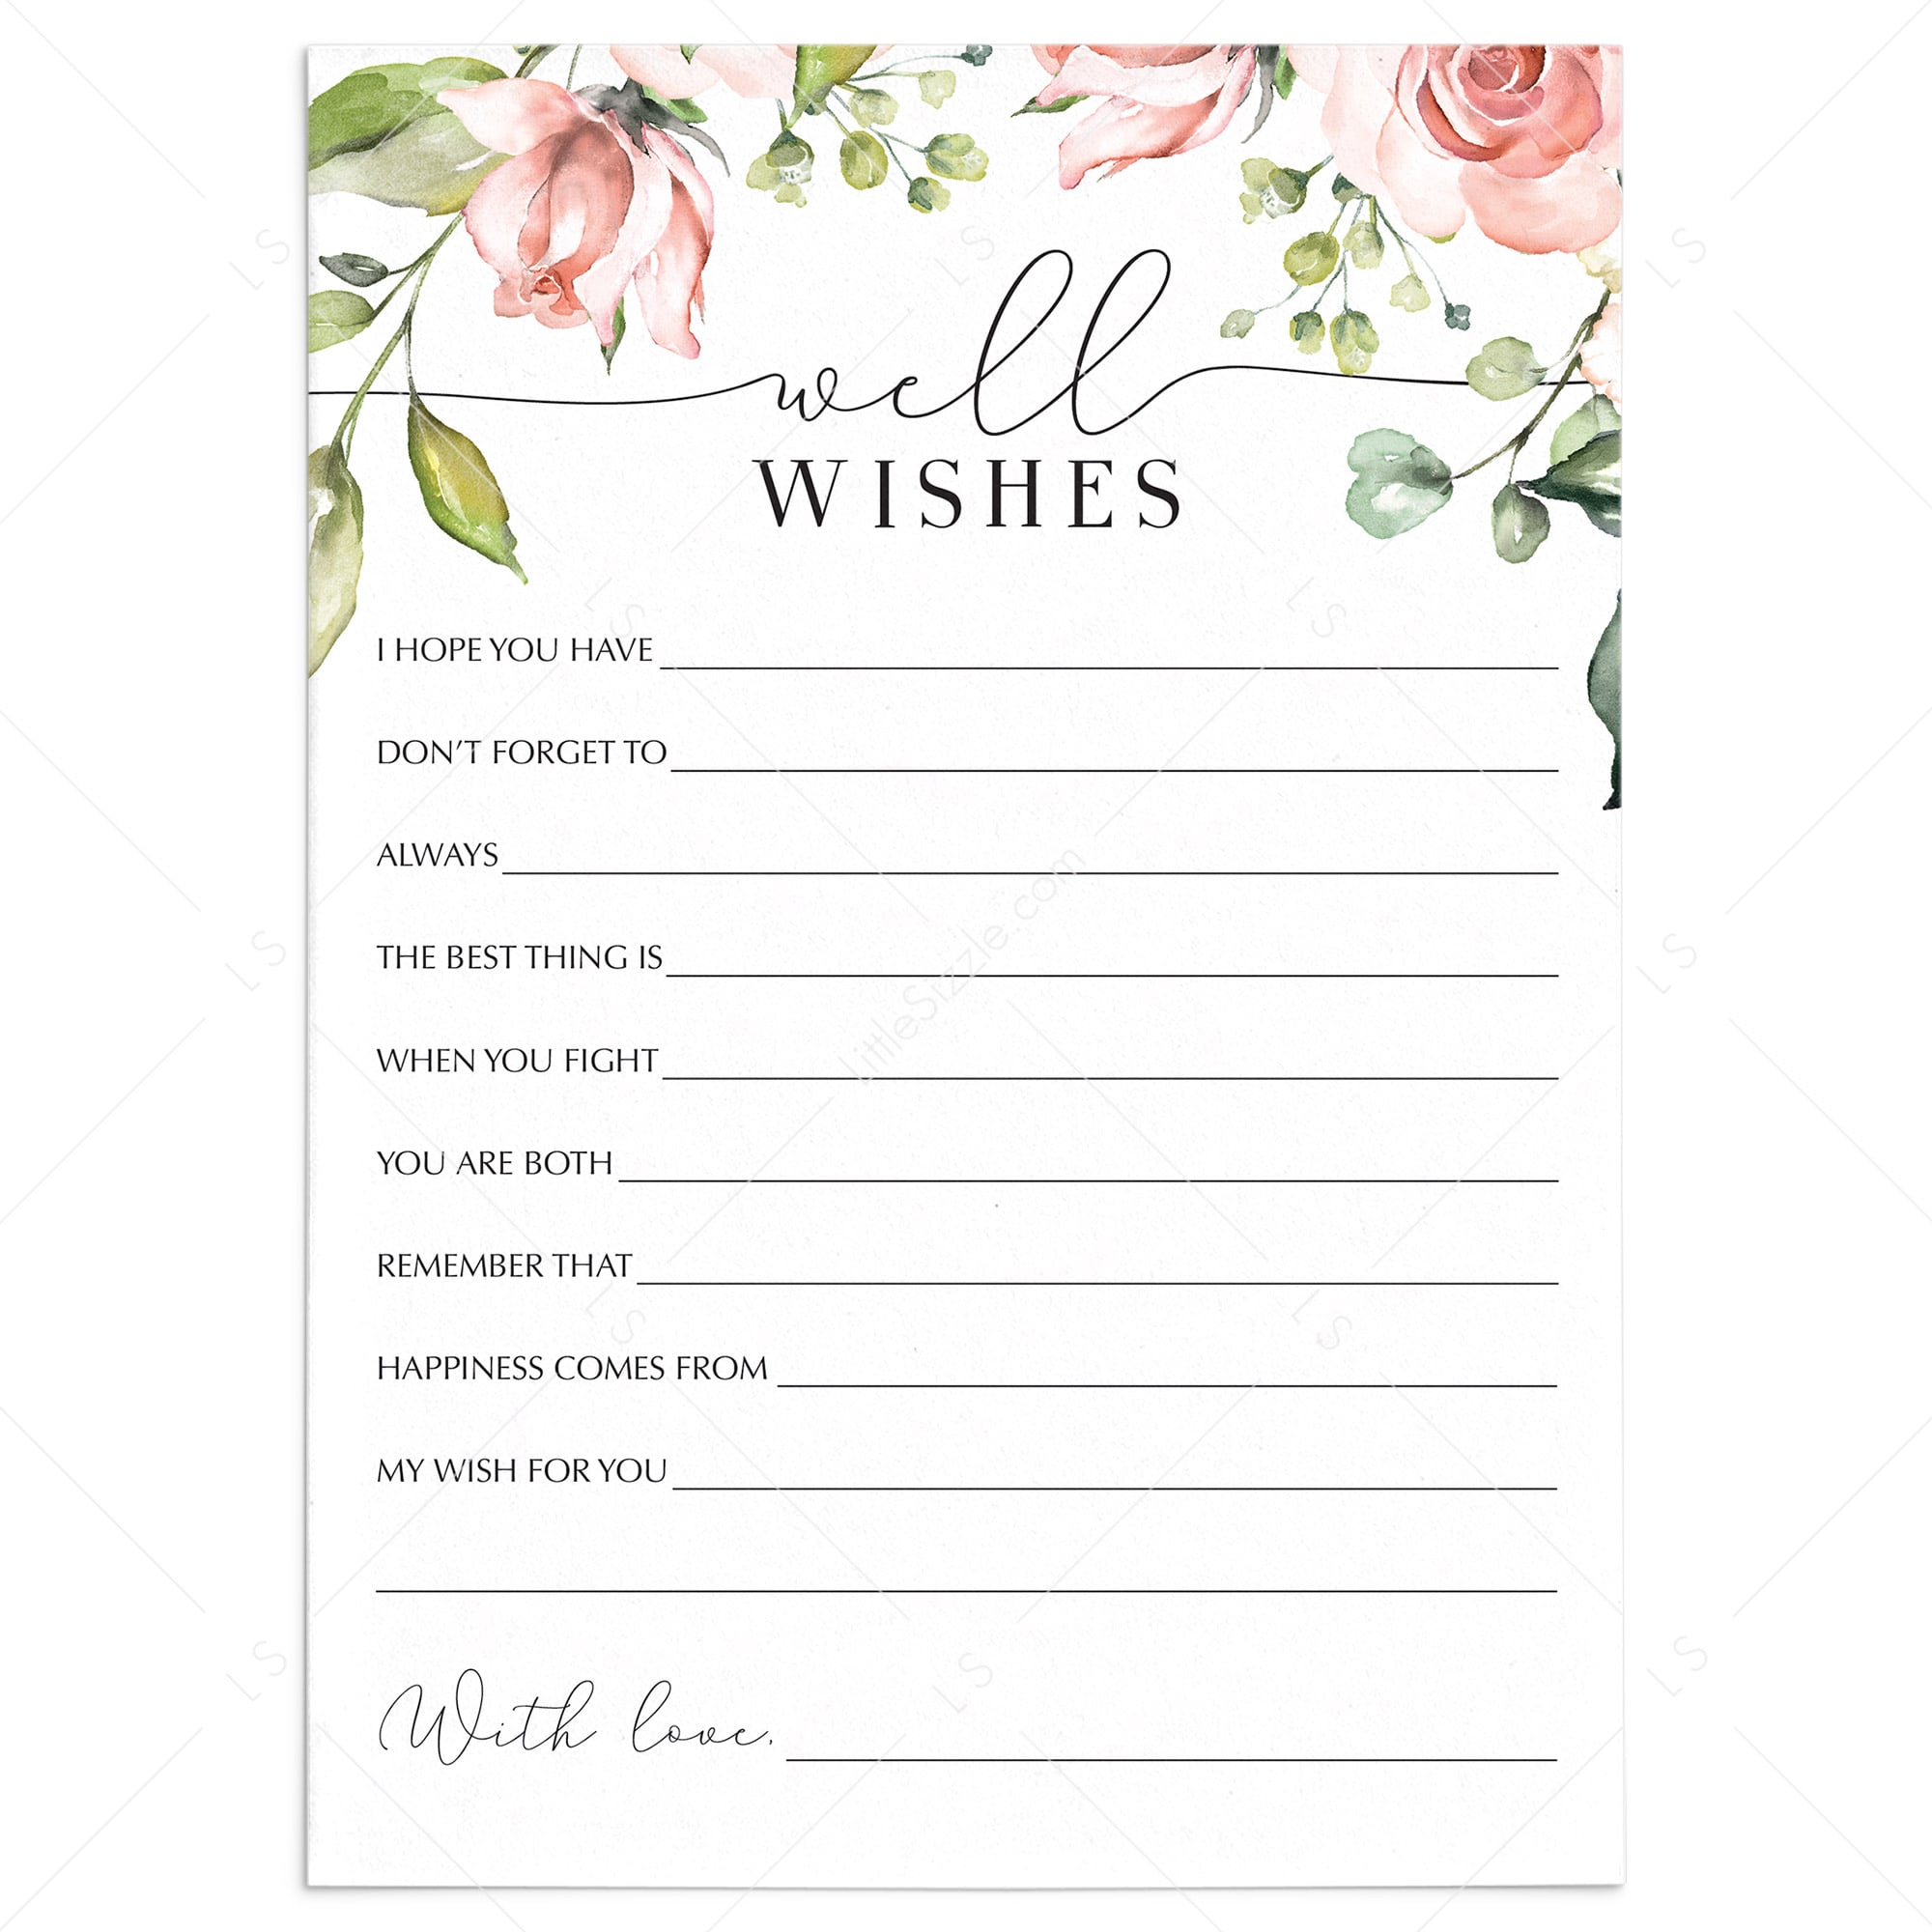 Printable Well Wishes Cards with Blush Roses by LittleSizzle